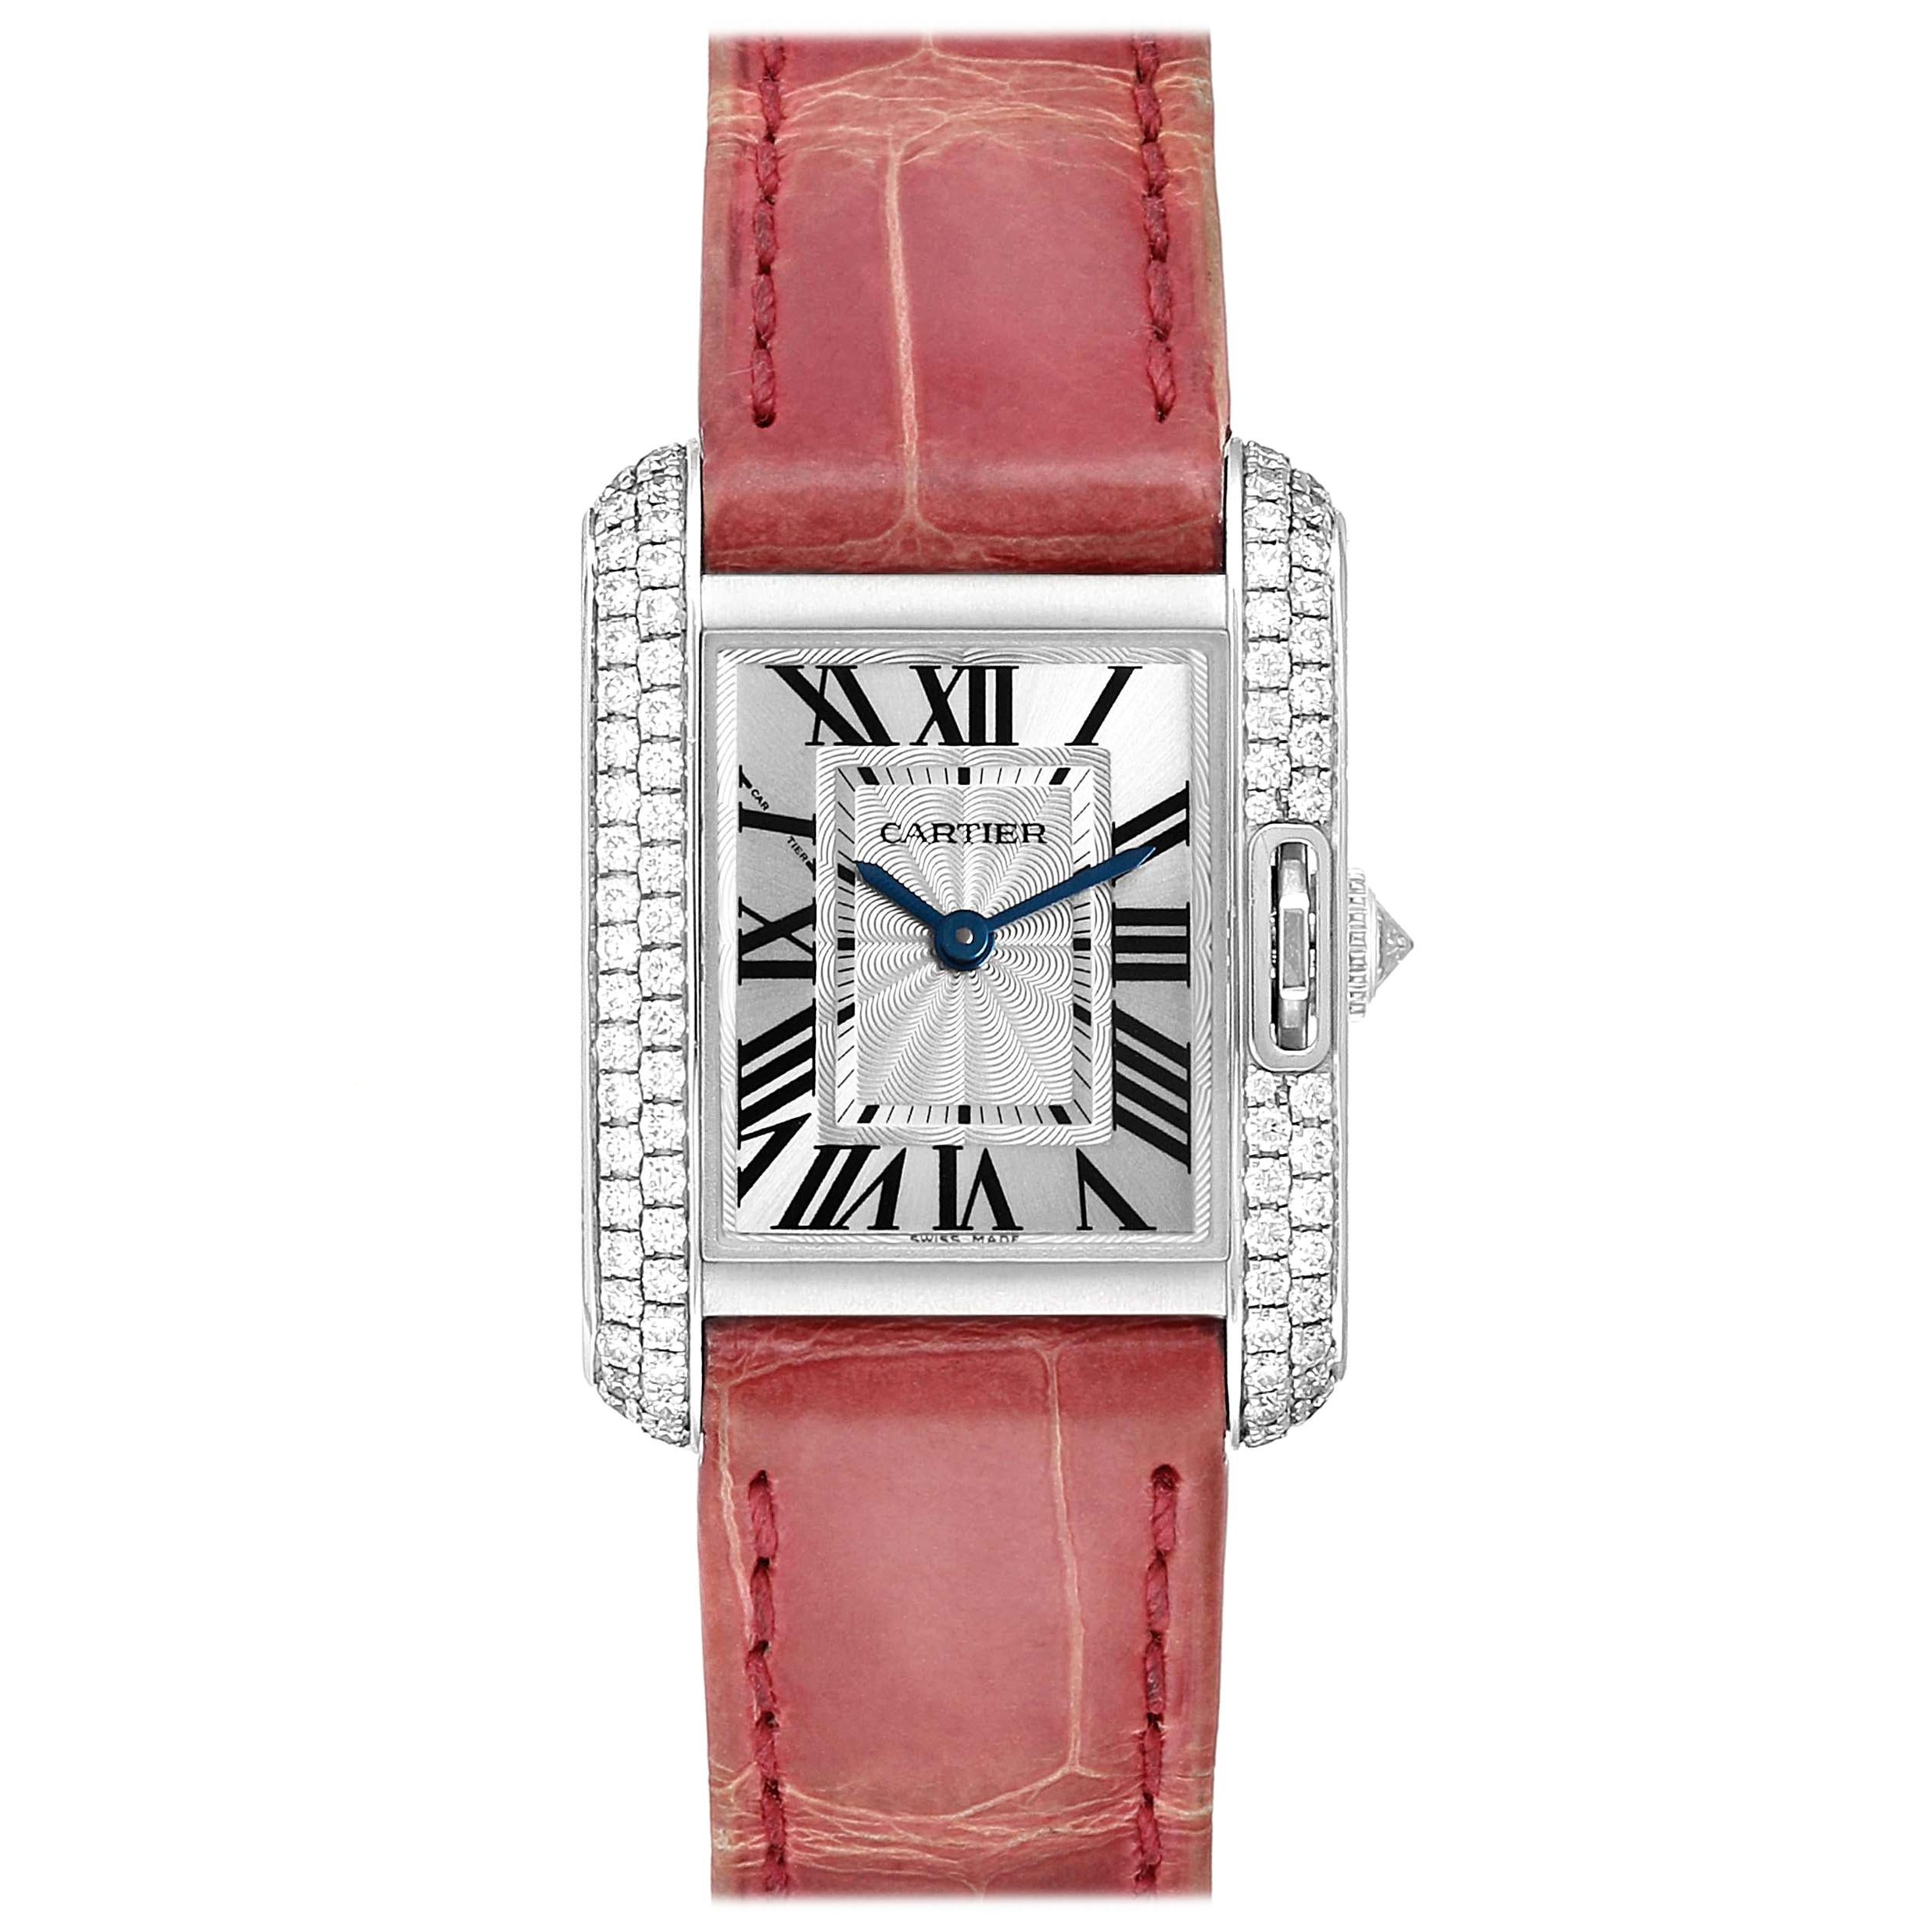 Cartier Tank Anglaise White Gold Diamond Ladies Watch WT100015 Box Papers